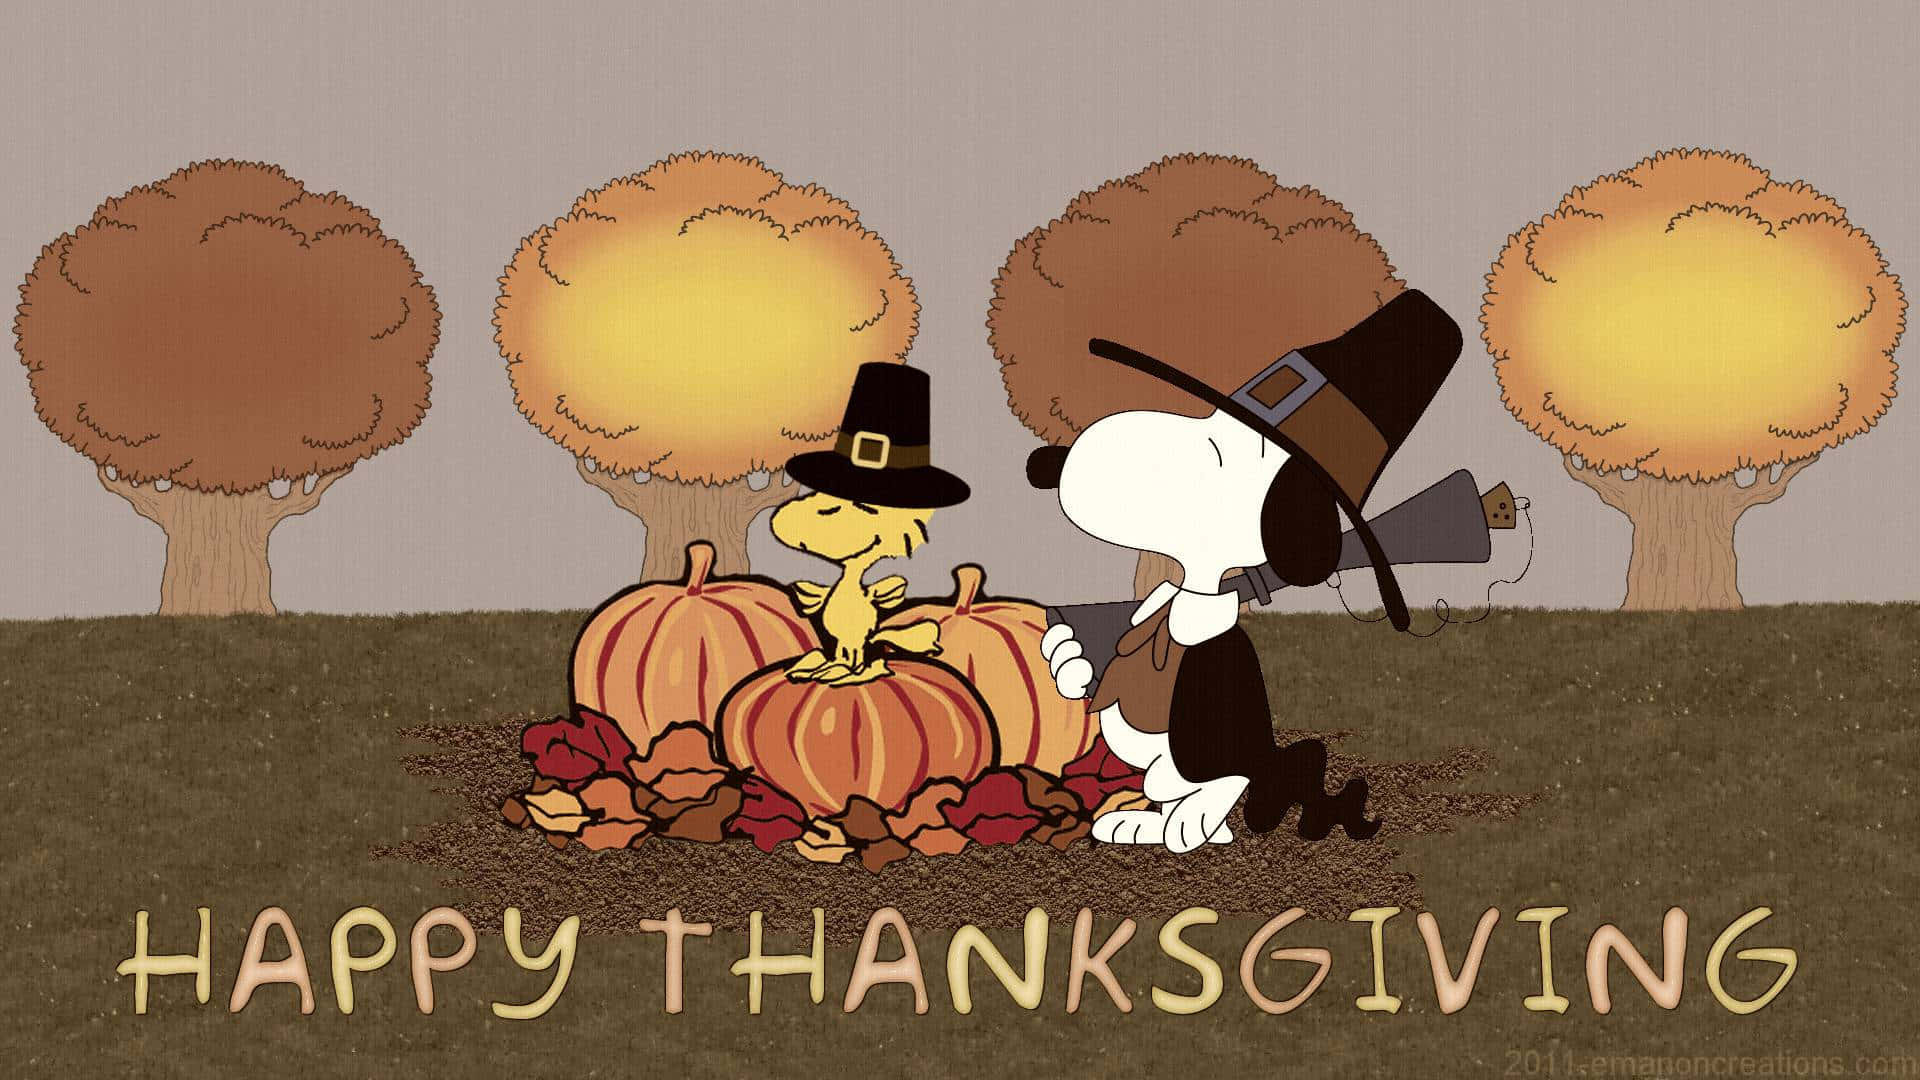 Snoopy Celebrates Thanksgiving With Family